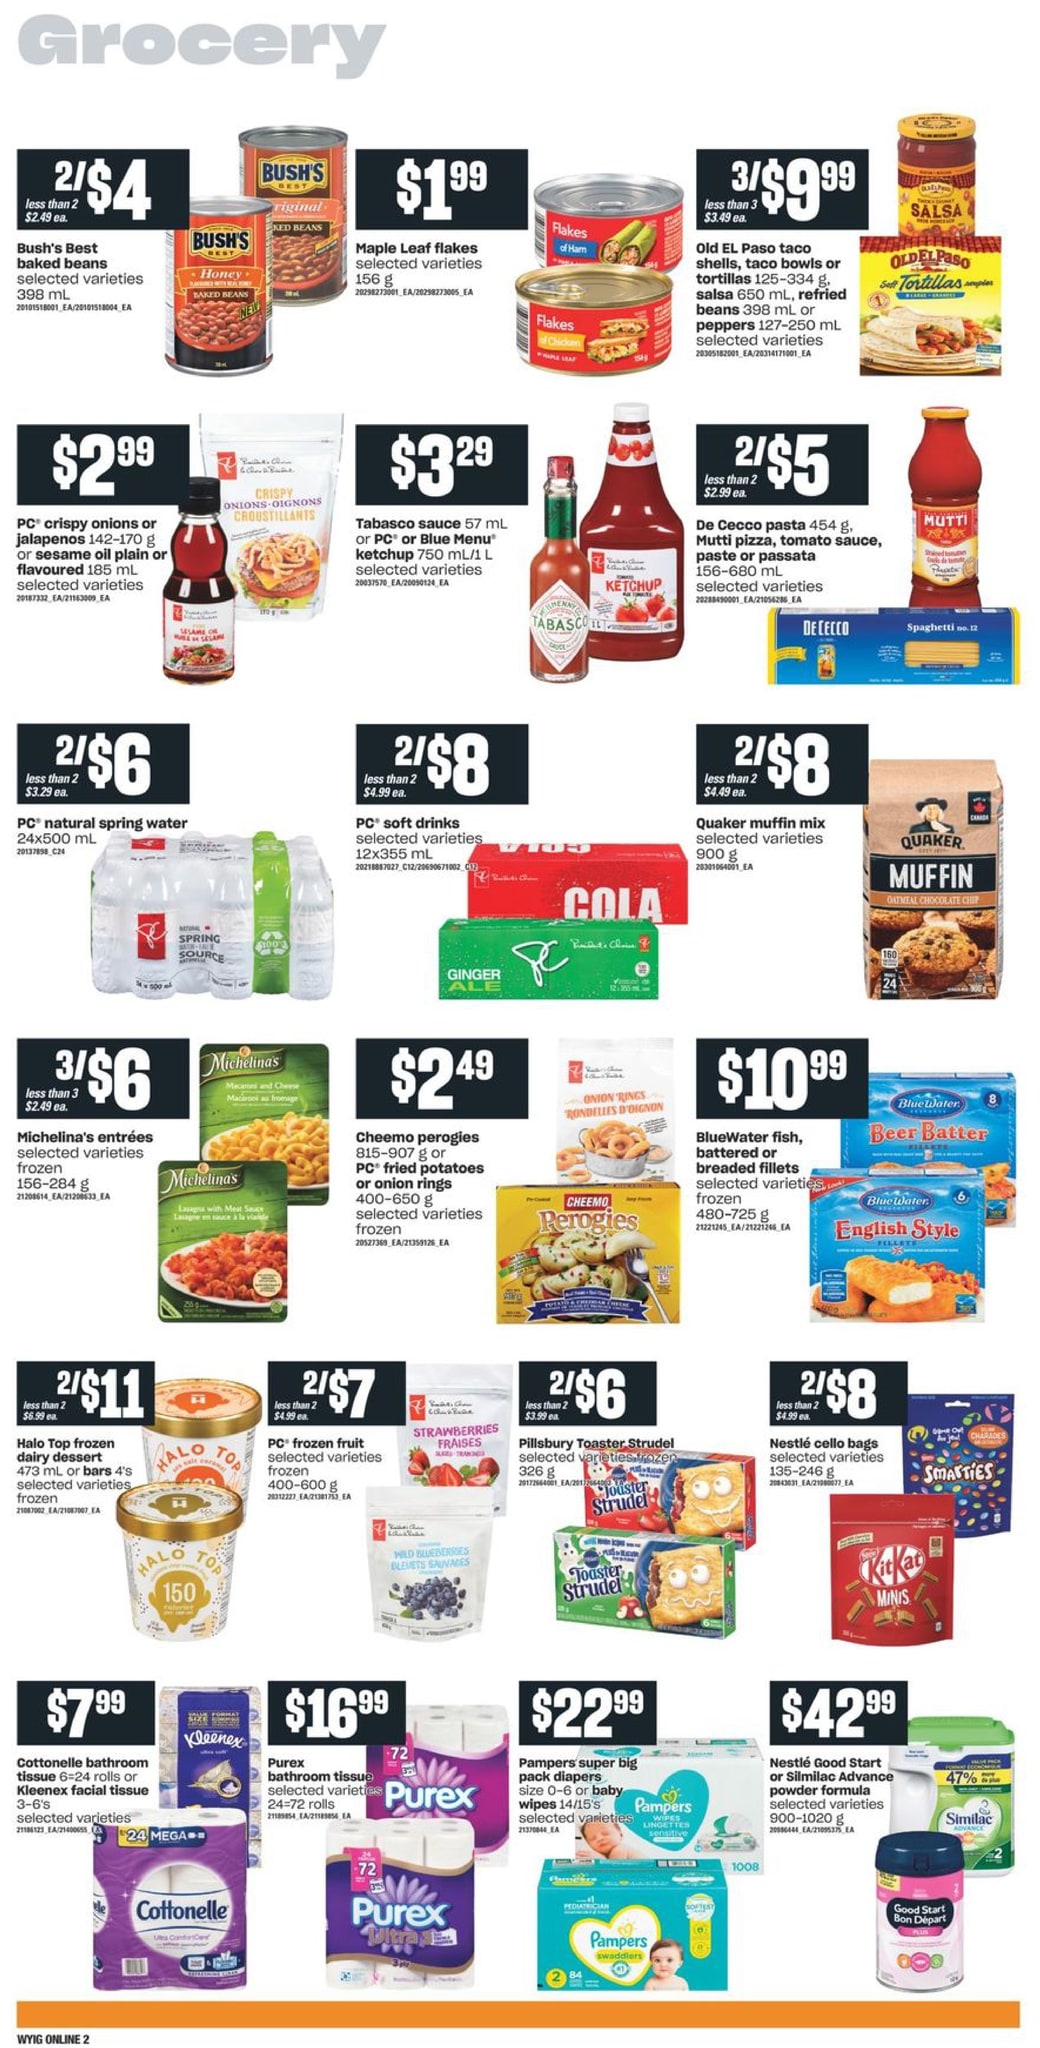 Independent British Columbia - Weekly Flyer Specials - Page 7